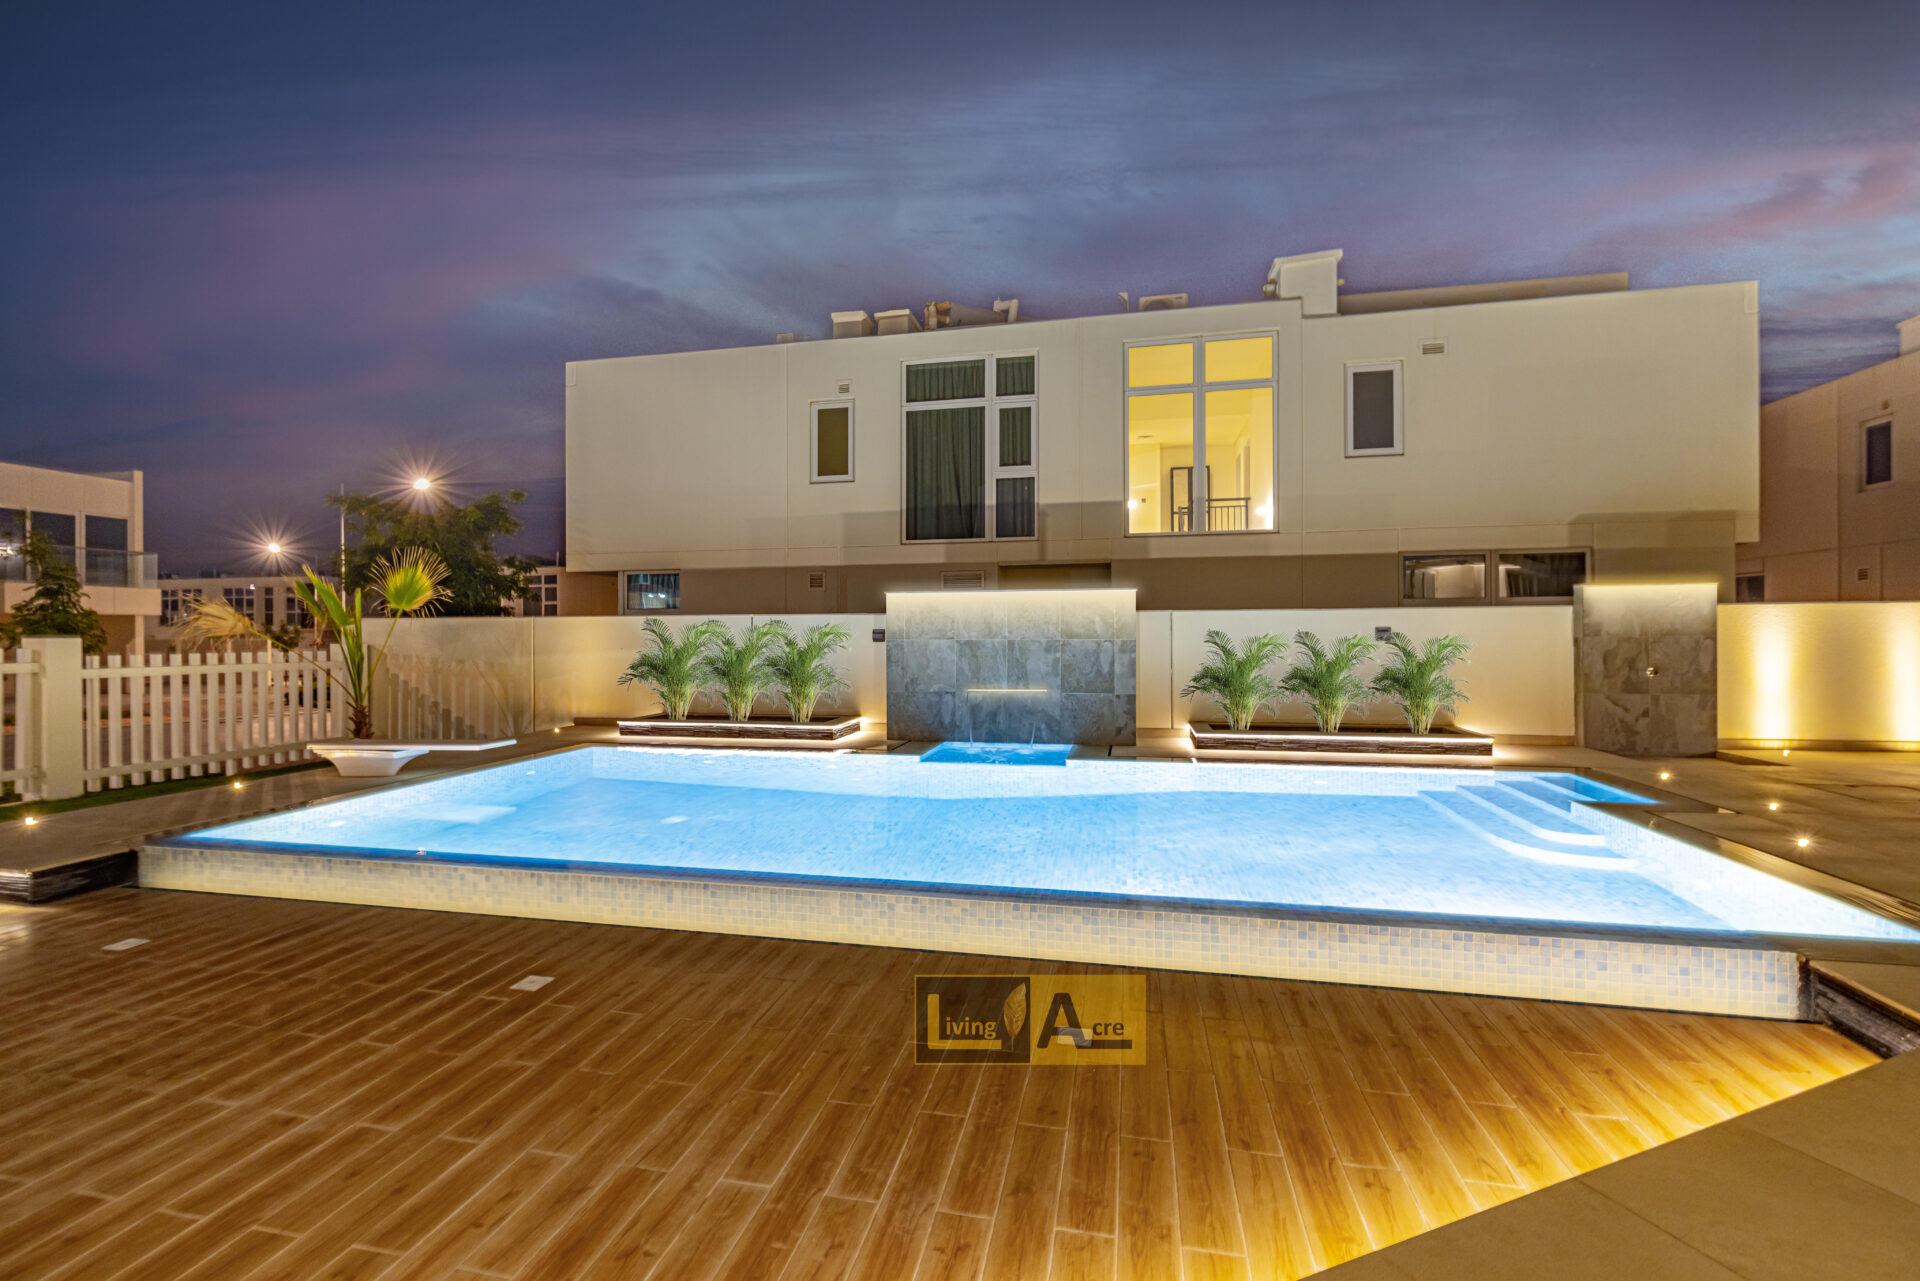 why Swimming Pool is Important for home